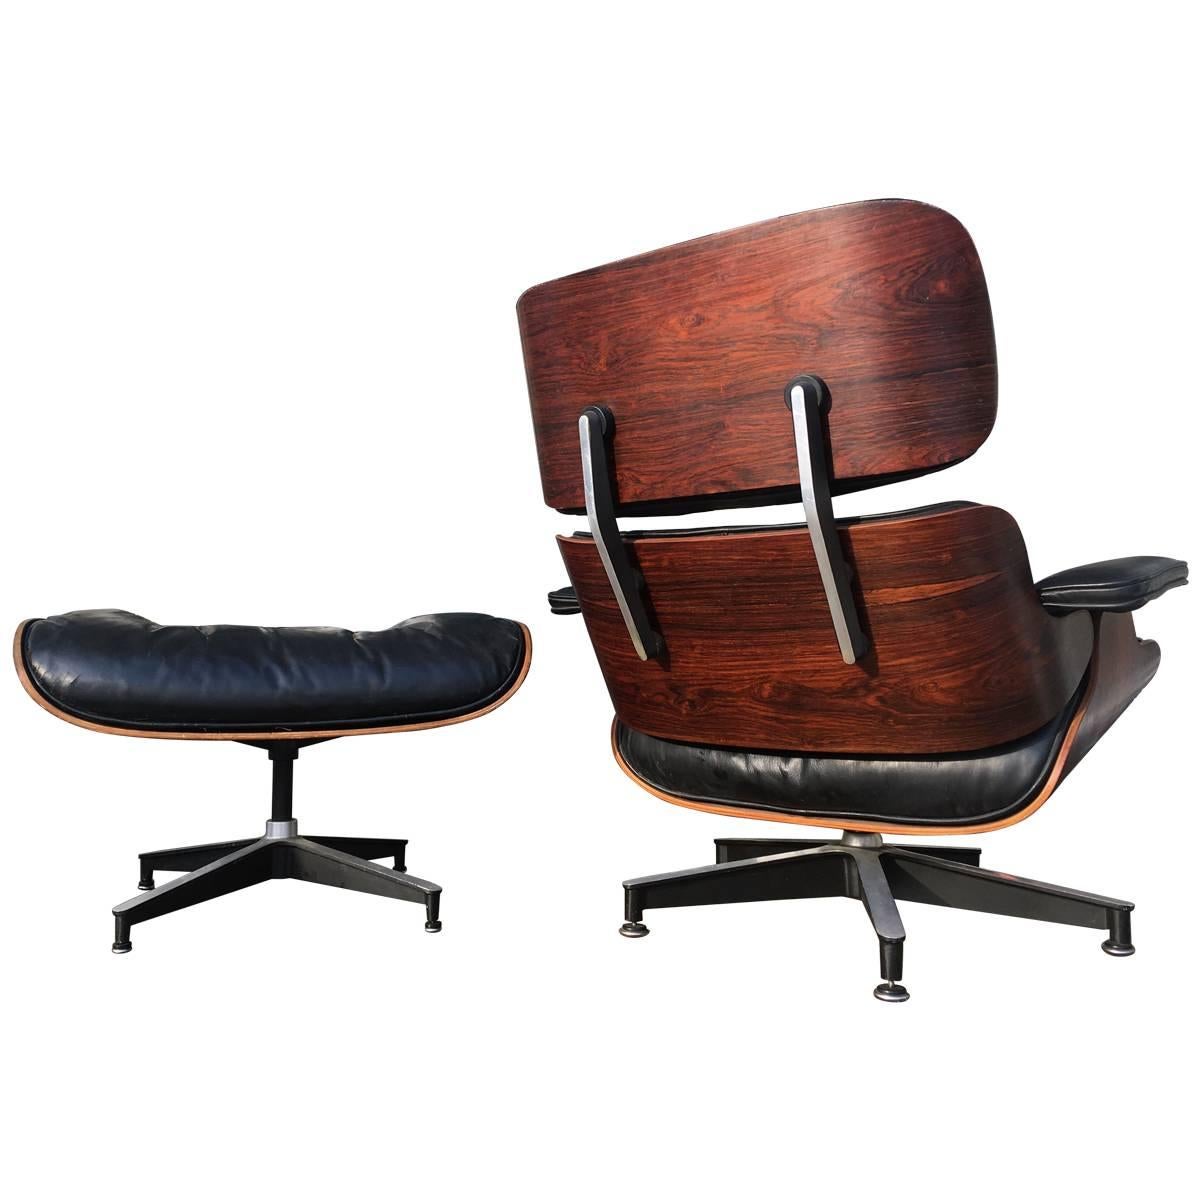 Early 1960s Eames Lounge with Down Cushions